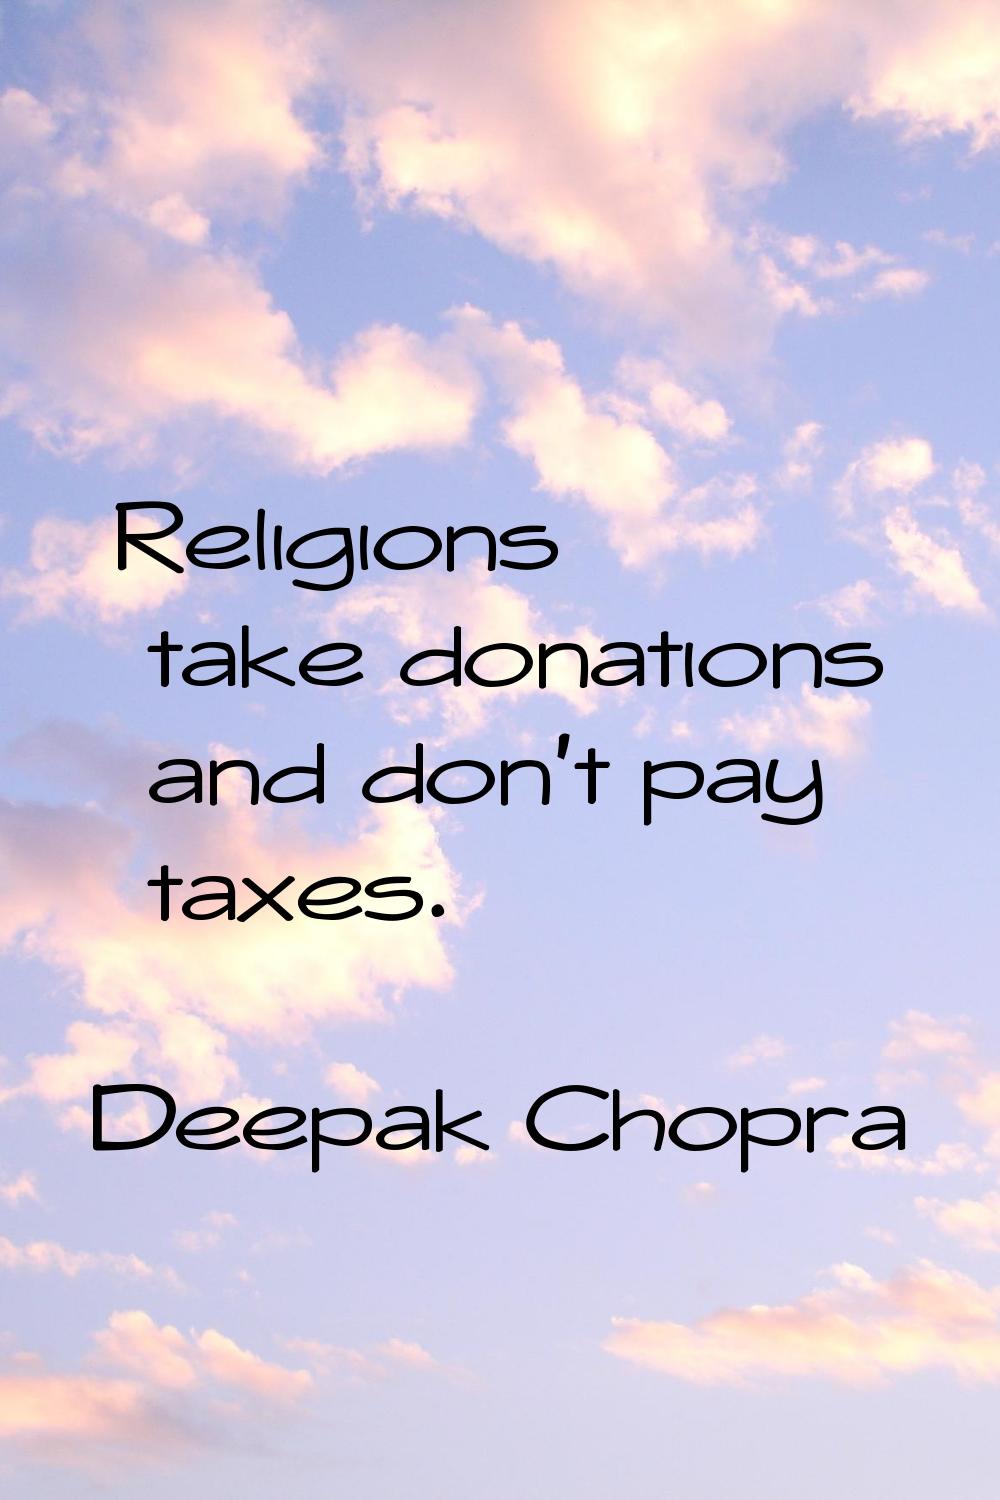 Religions take donations and don't pay taxes.